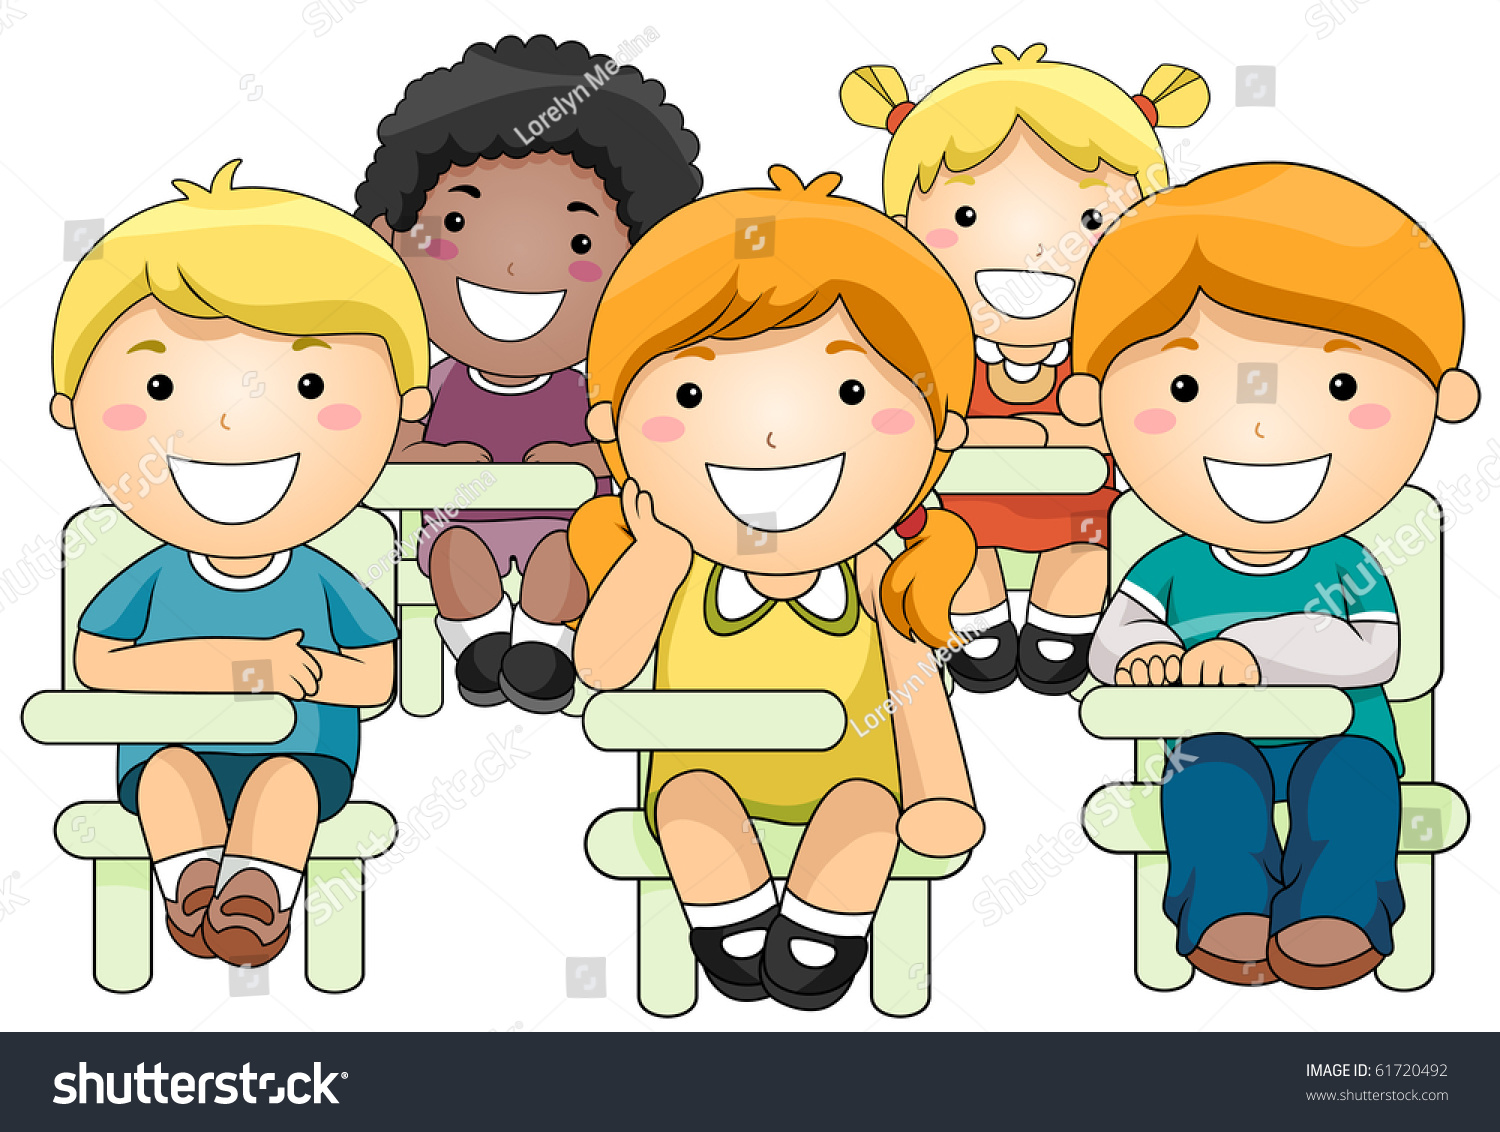 classroom clipart space - photo #49